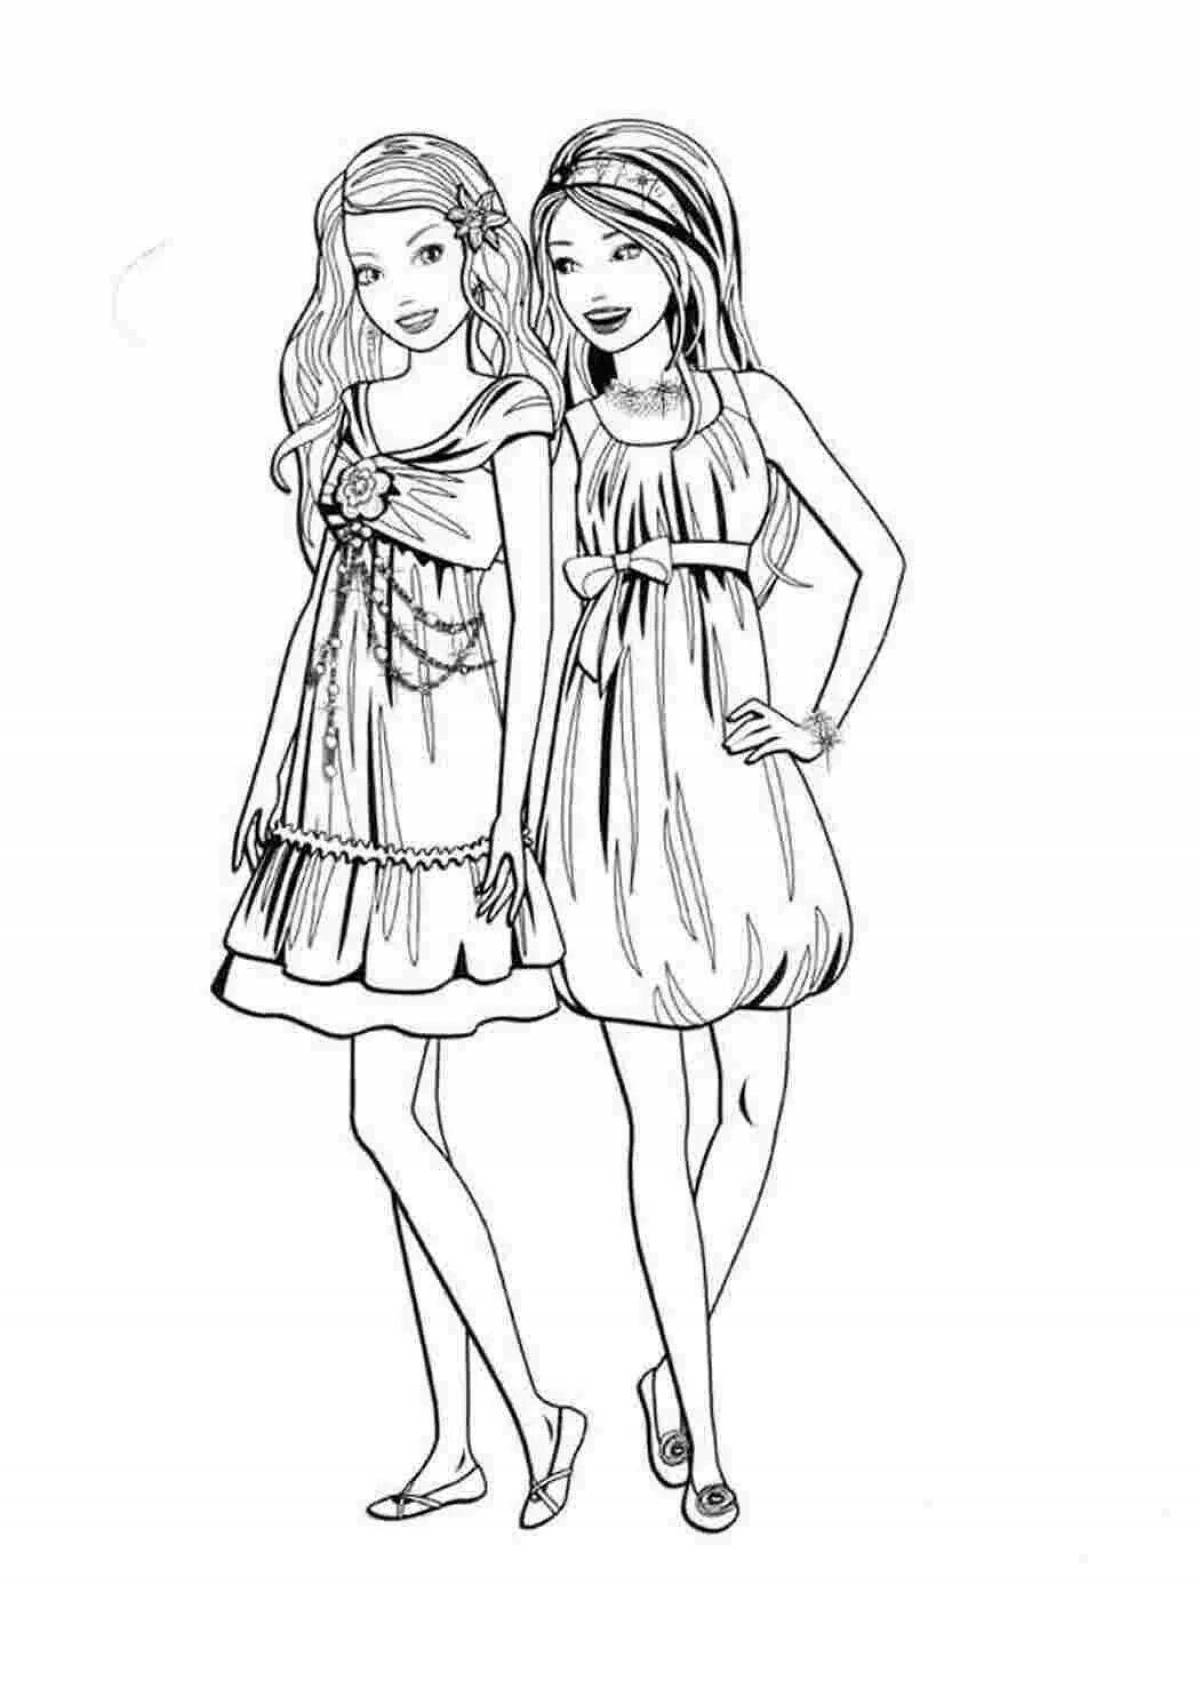 Playful coloring page of two sisters